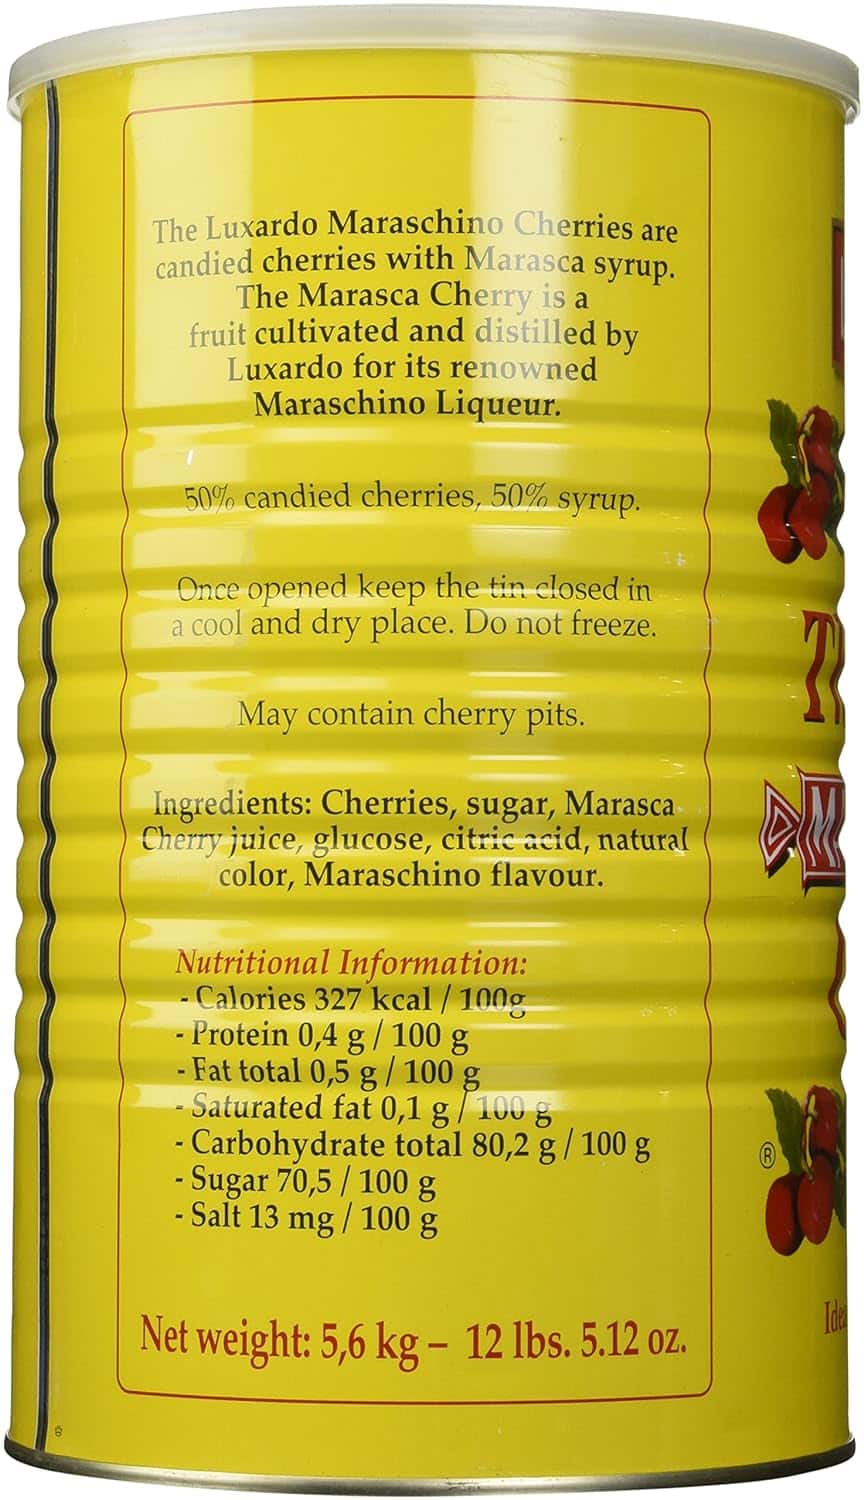 Luxardo Gourmet Maraschino Cherries - 12 lb Can: The Perfect Addition to Your Cocktails and Desserts